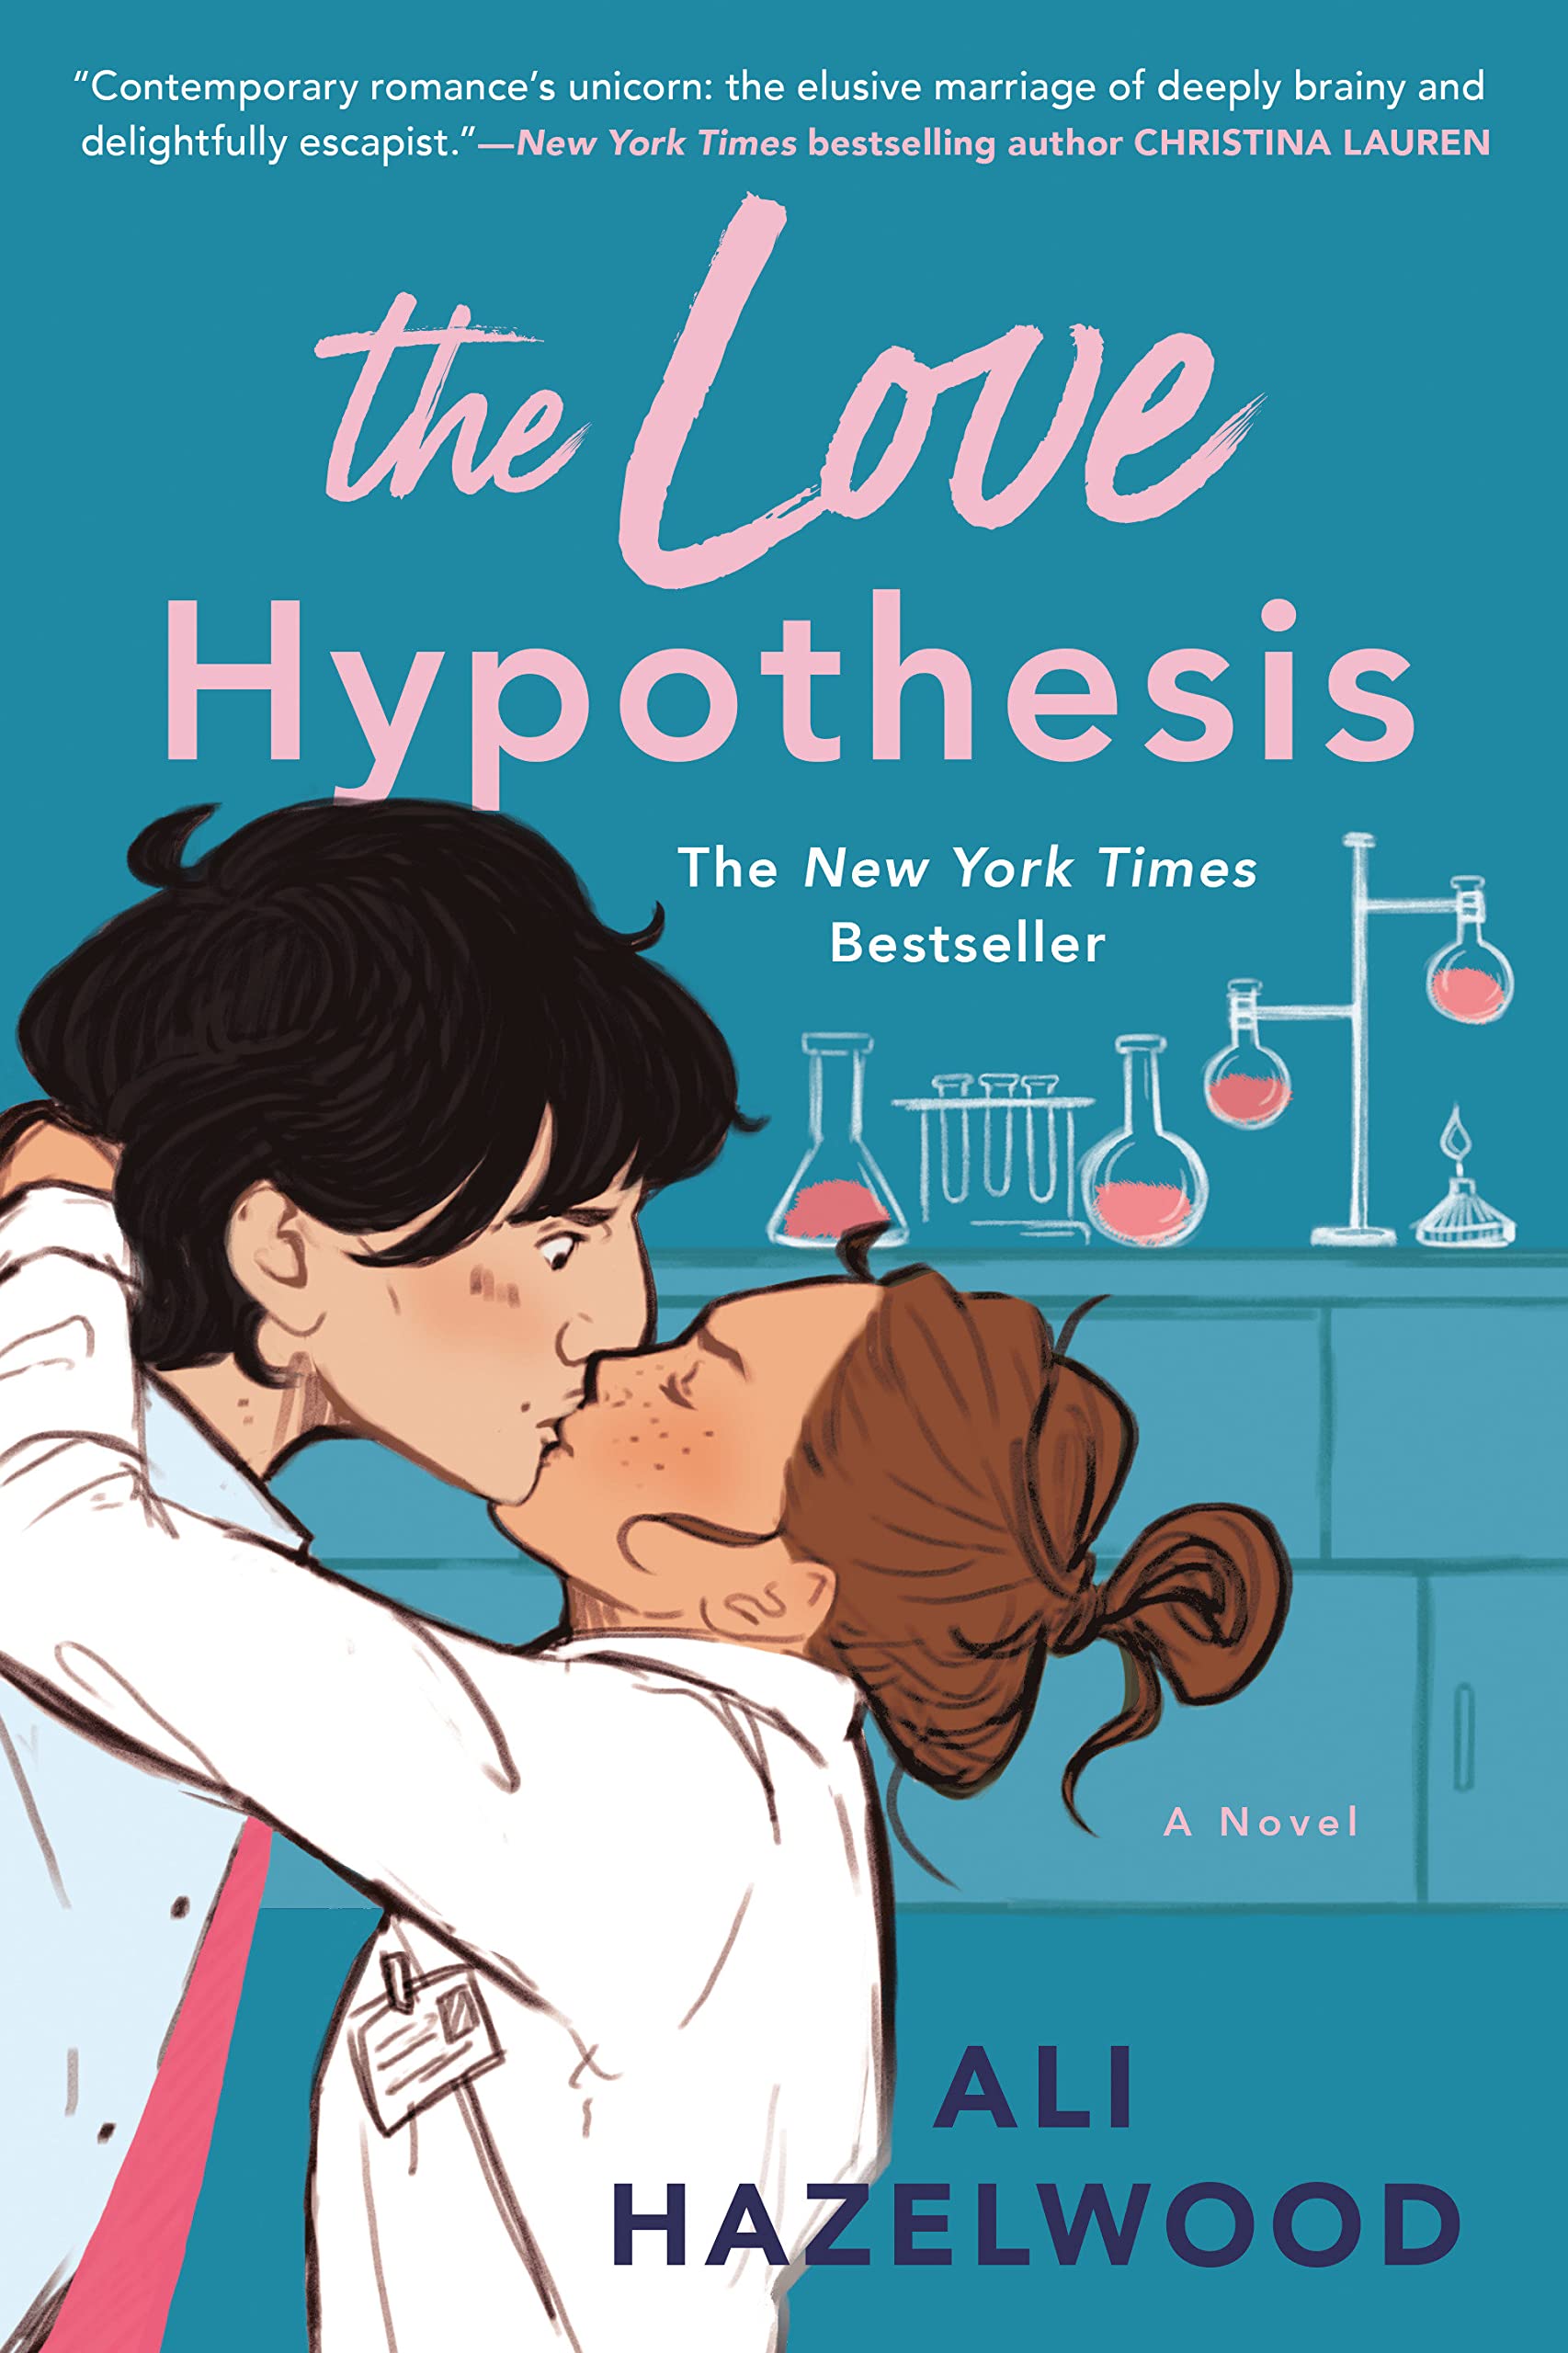 The Love Hypothesis Paperback by Ali Hazelwood